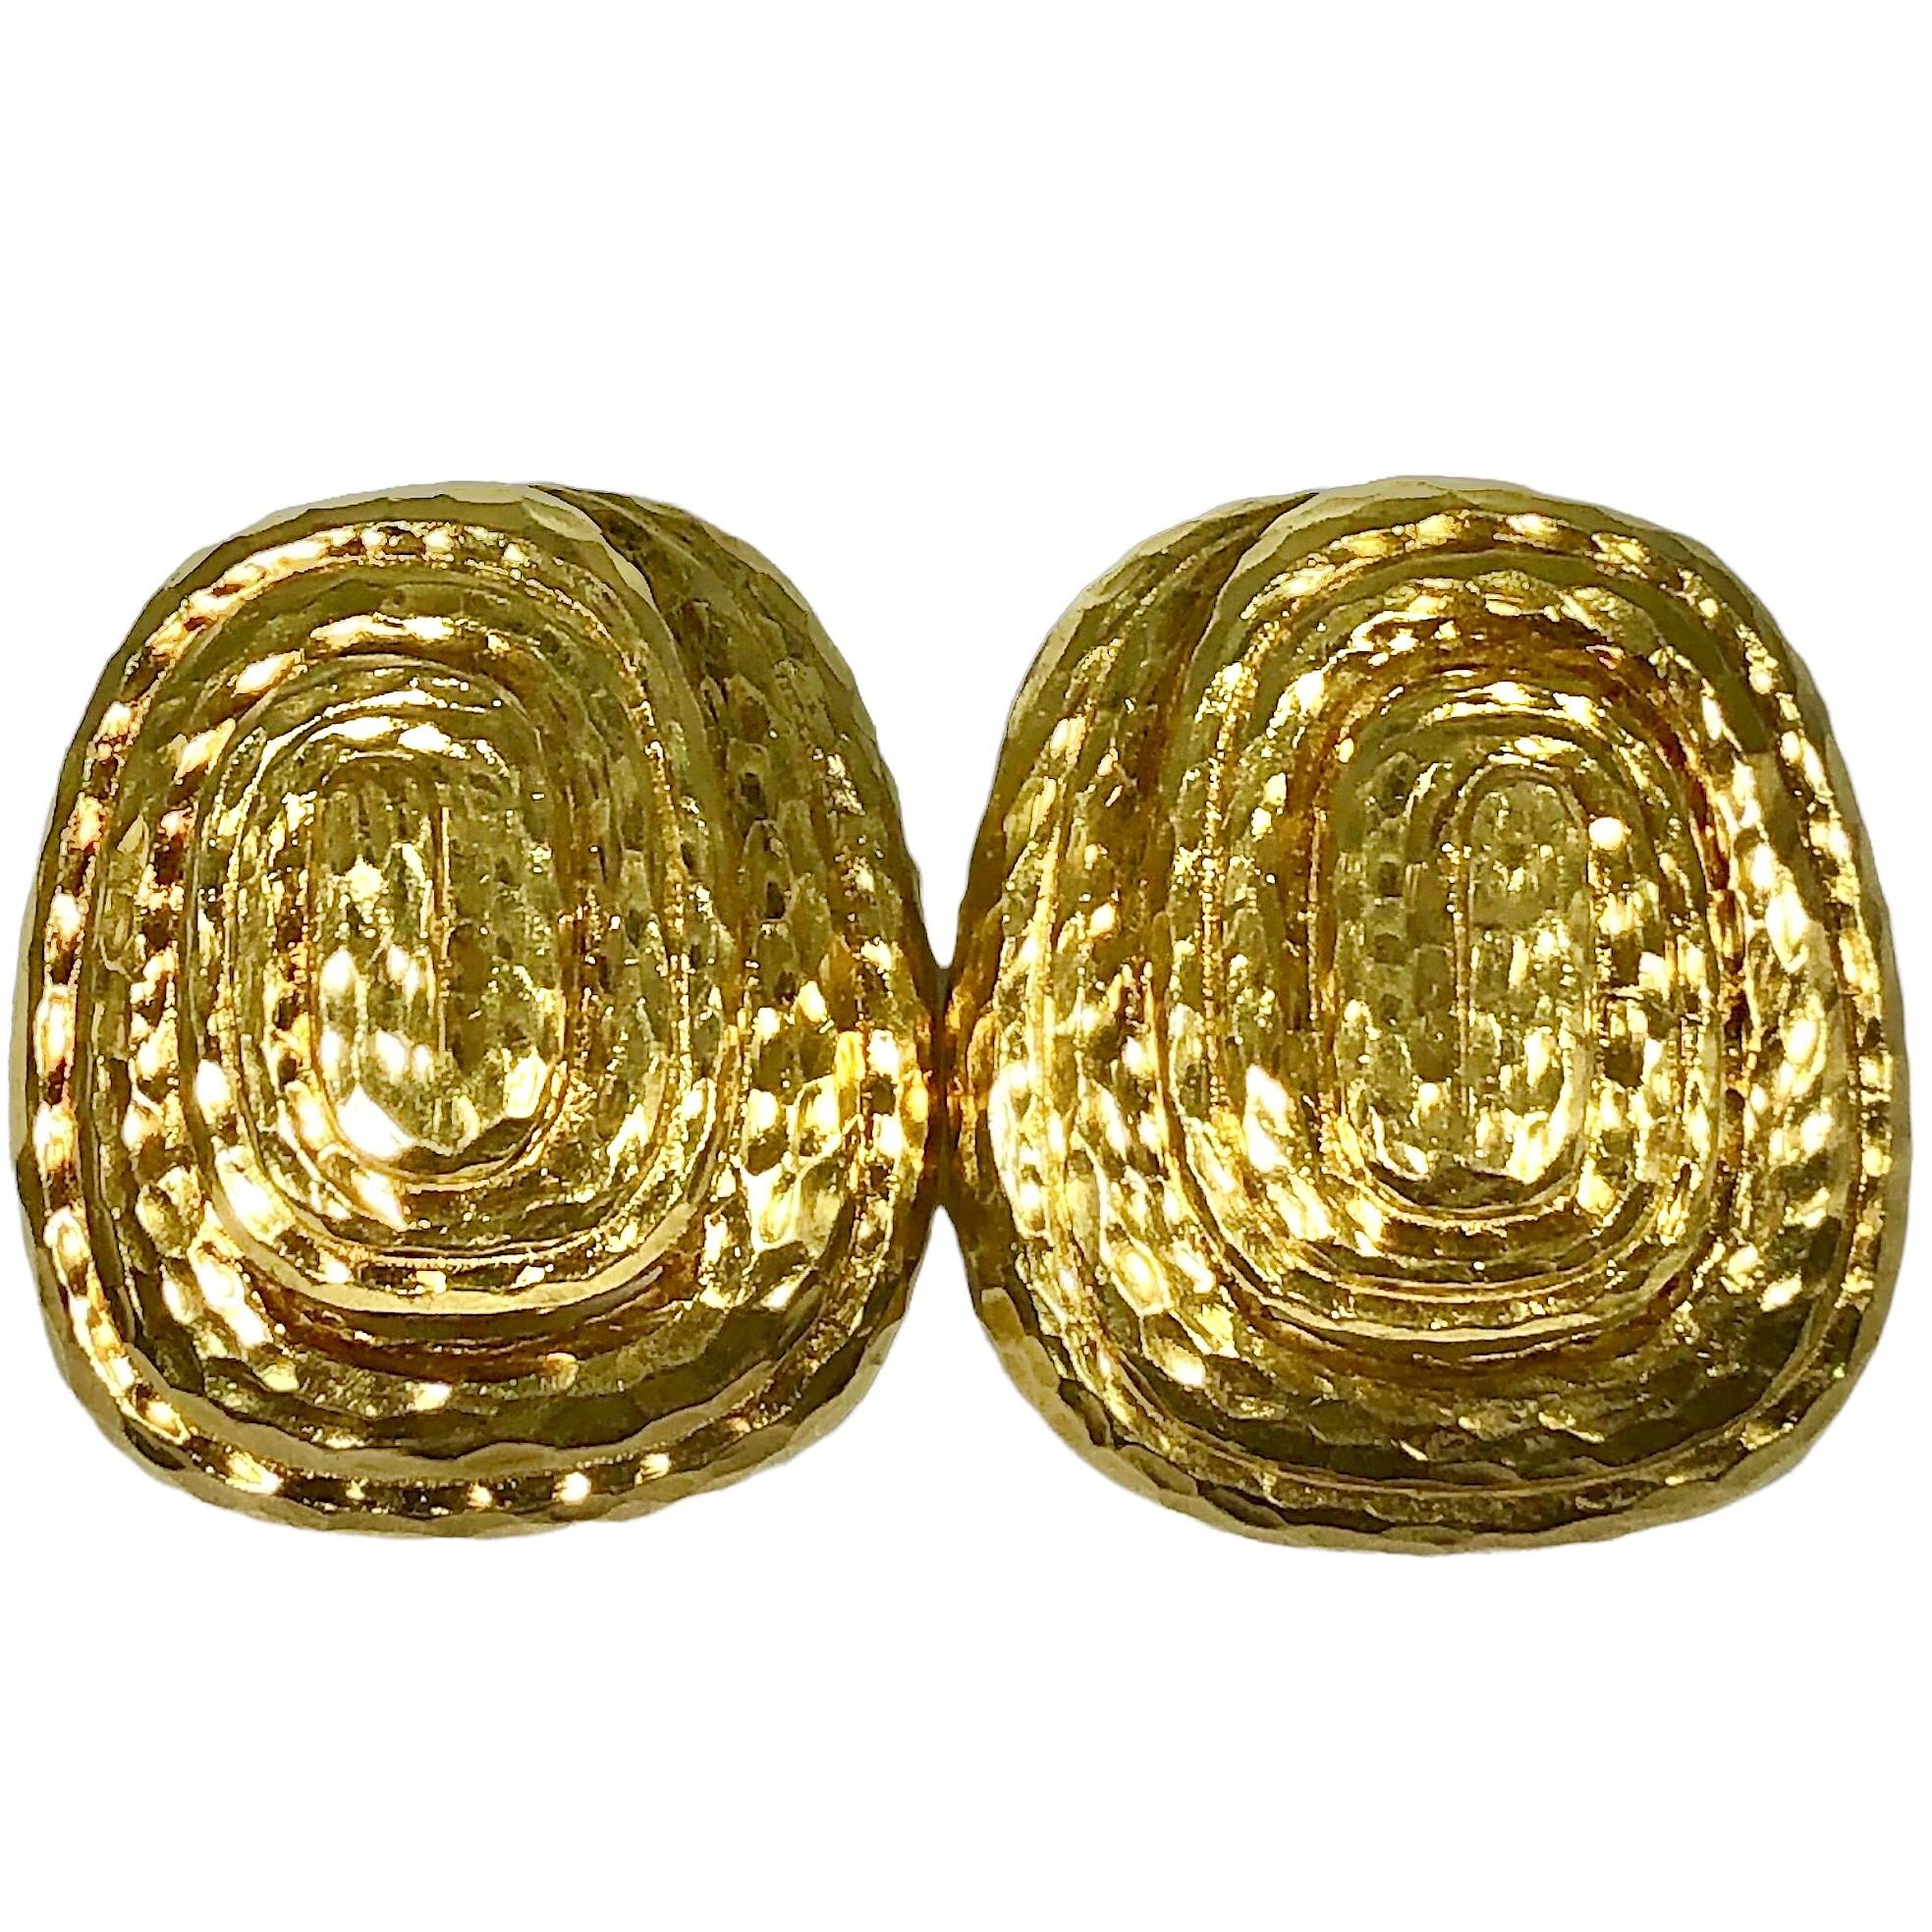 This vintage pair of hammered finish 18K Yellow Gold David Webb clip on earrings are very dimensional, rising to a height of 1/2 inch at their centers. Each earring measures 1 1/4 inches by 1 1/8 inches.  The clip on lever style backs are stamped